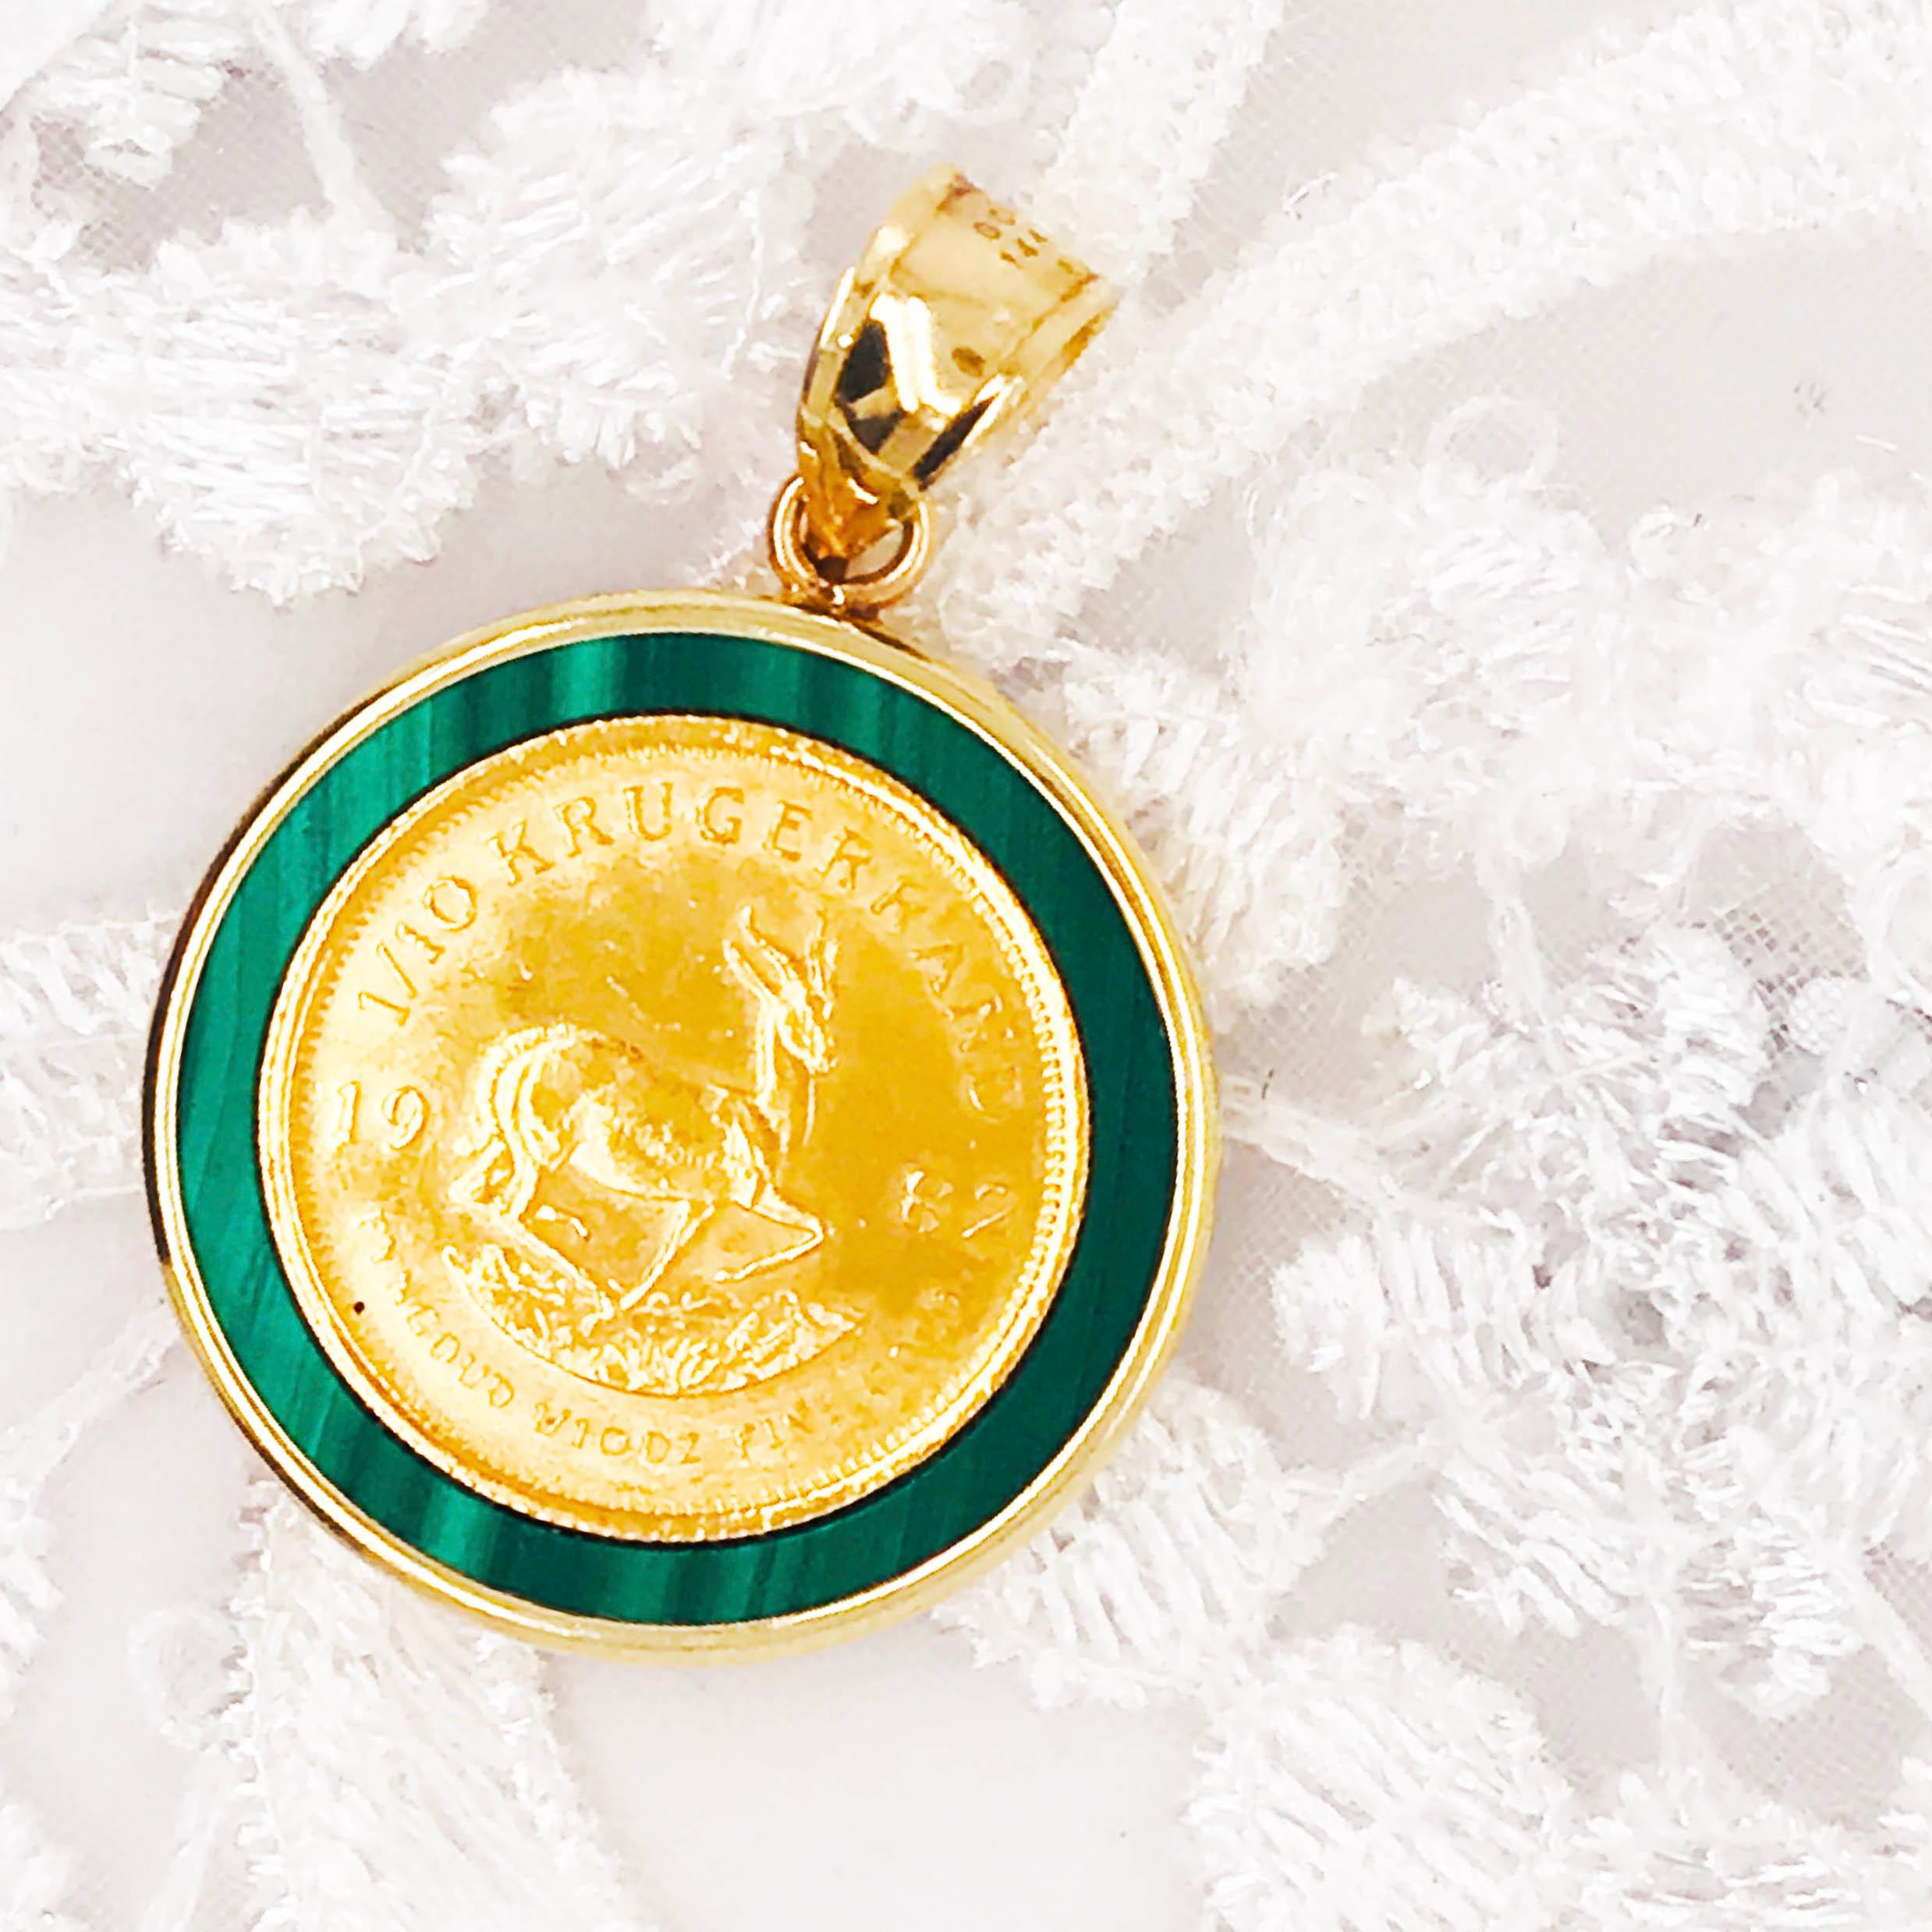 This is a genuine 1/10 oz 1982 Krugerrand gold coin! Set in a genuine malachite coin bezel with a 14k yellow gold bail! This is a rich and special jewelry piece. Malachite has unique green colors that are true only to this gemstone and the color